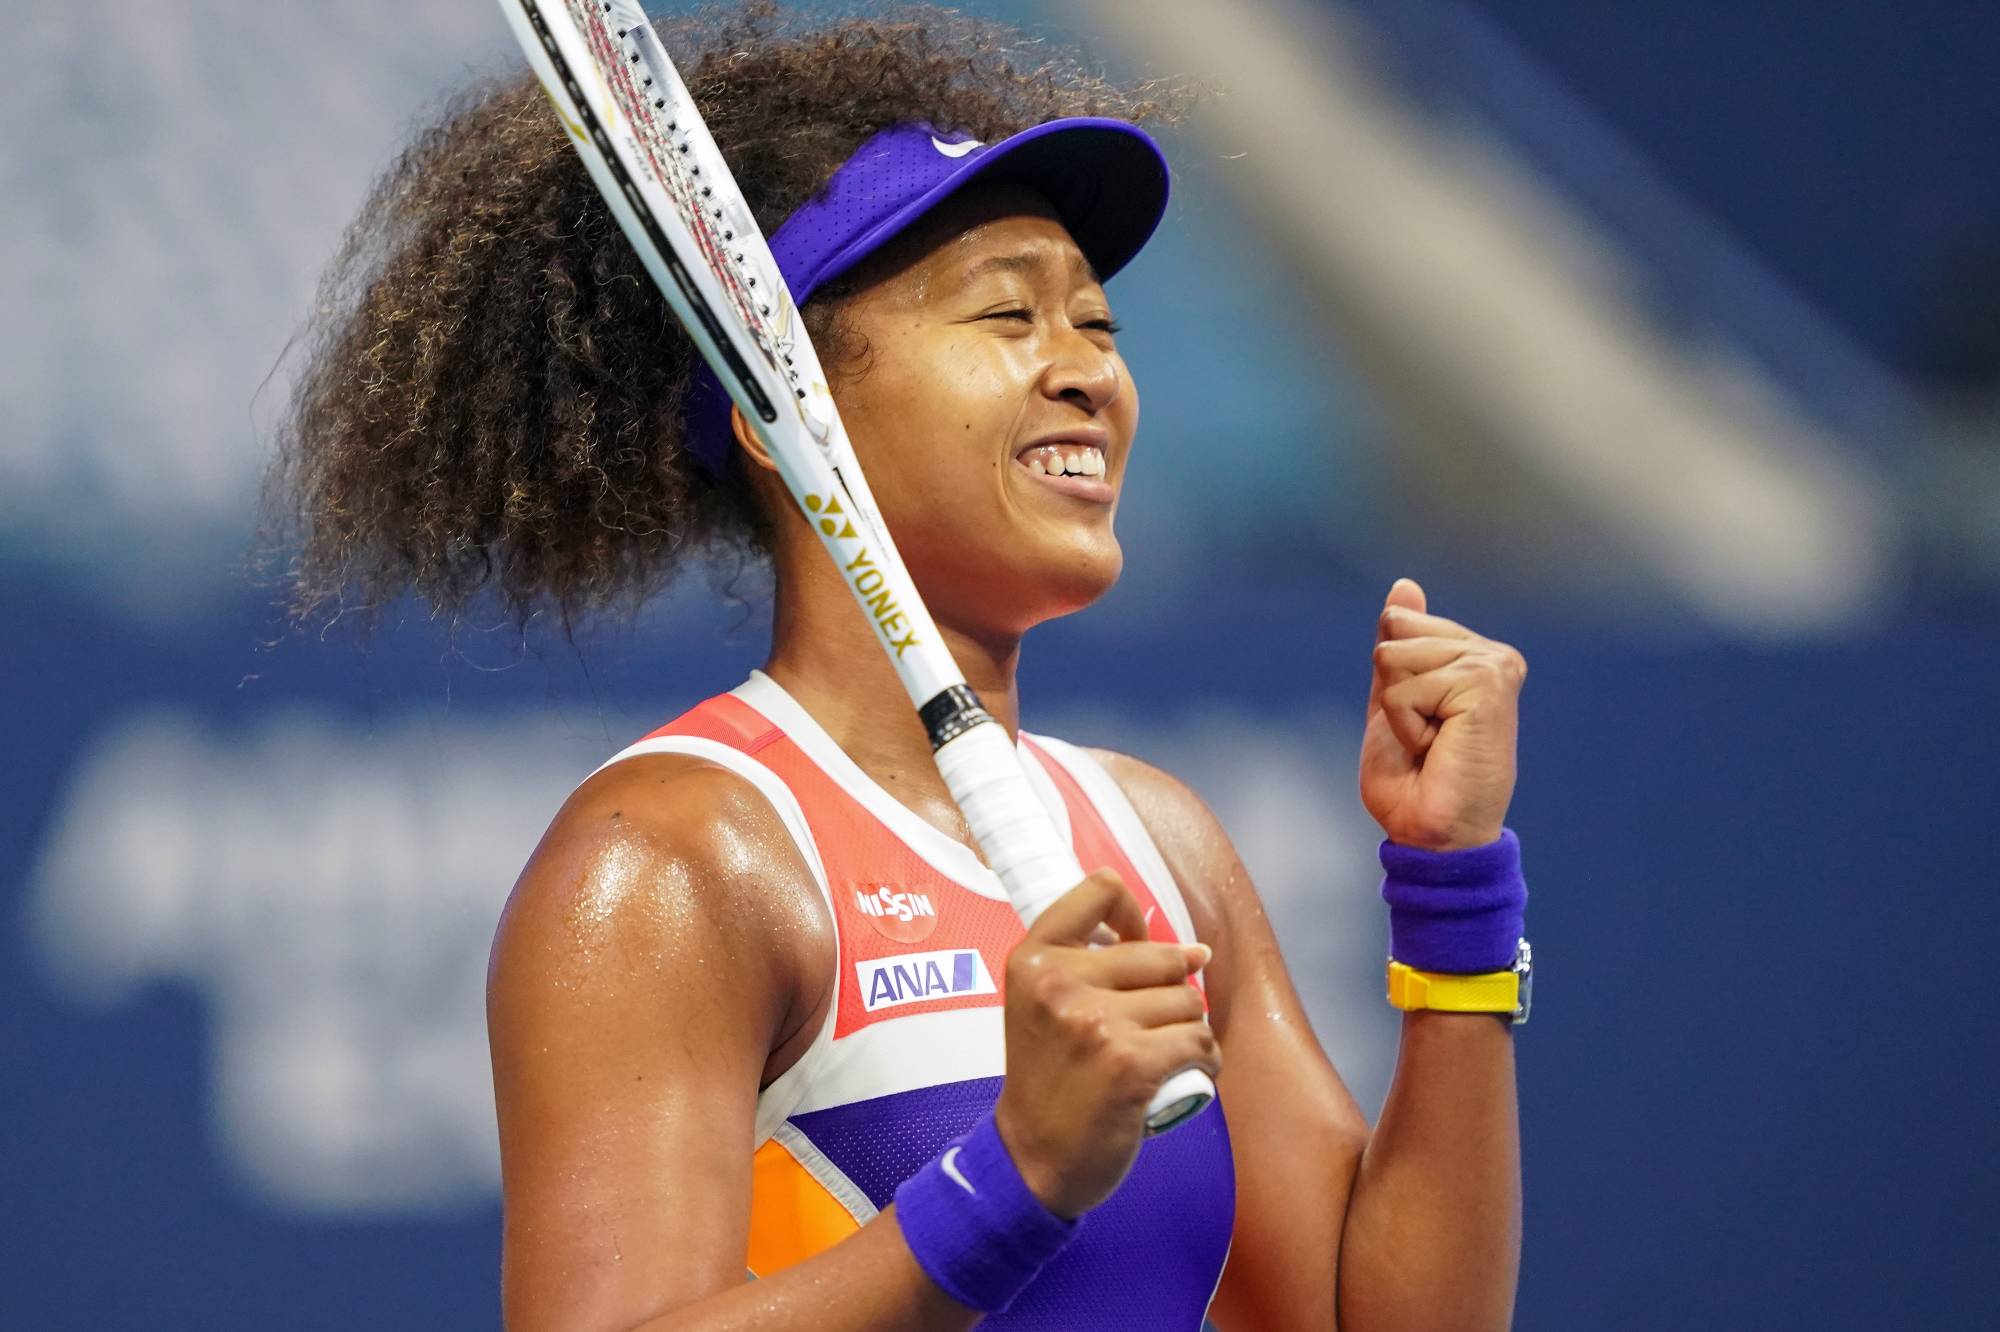 Naomi Osaka Receives Messages from Parents of Ahmaud Arbery